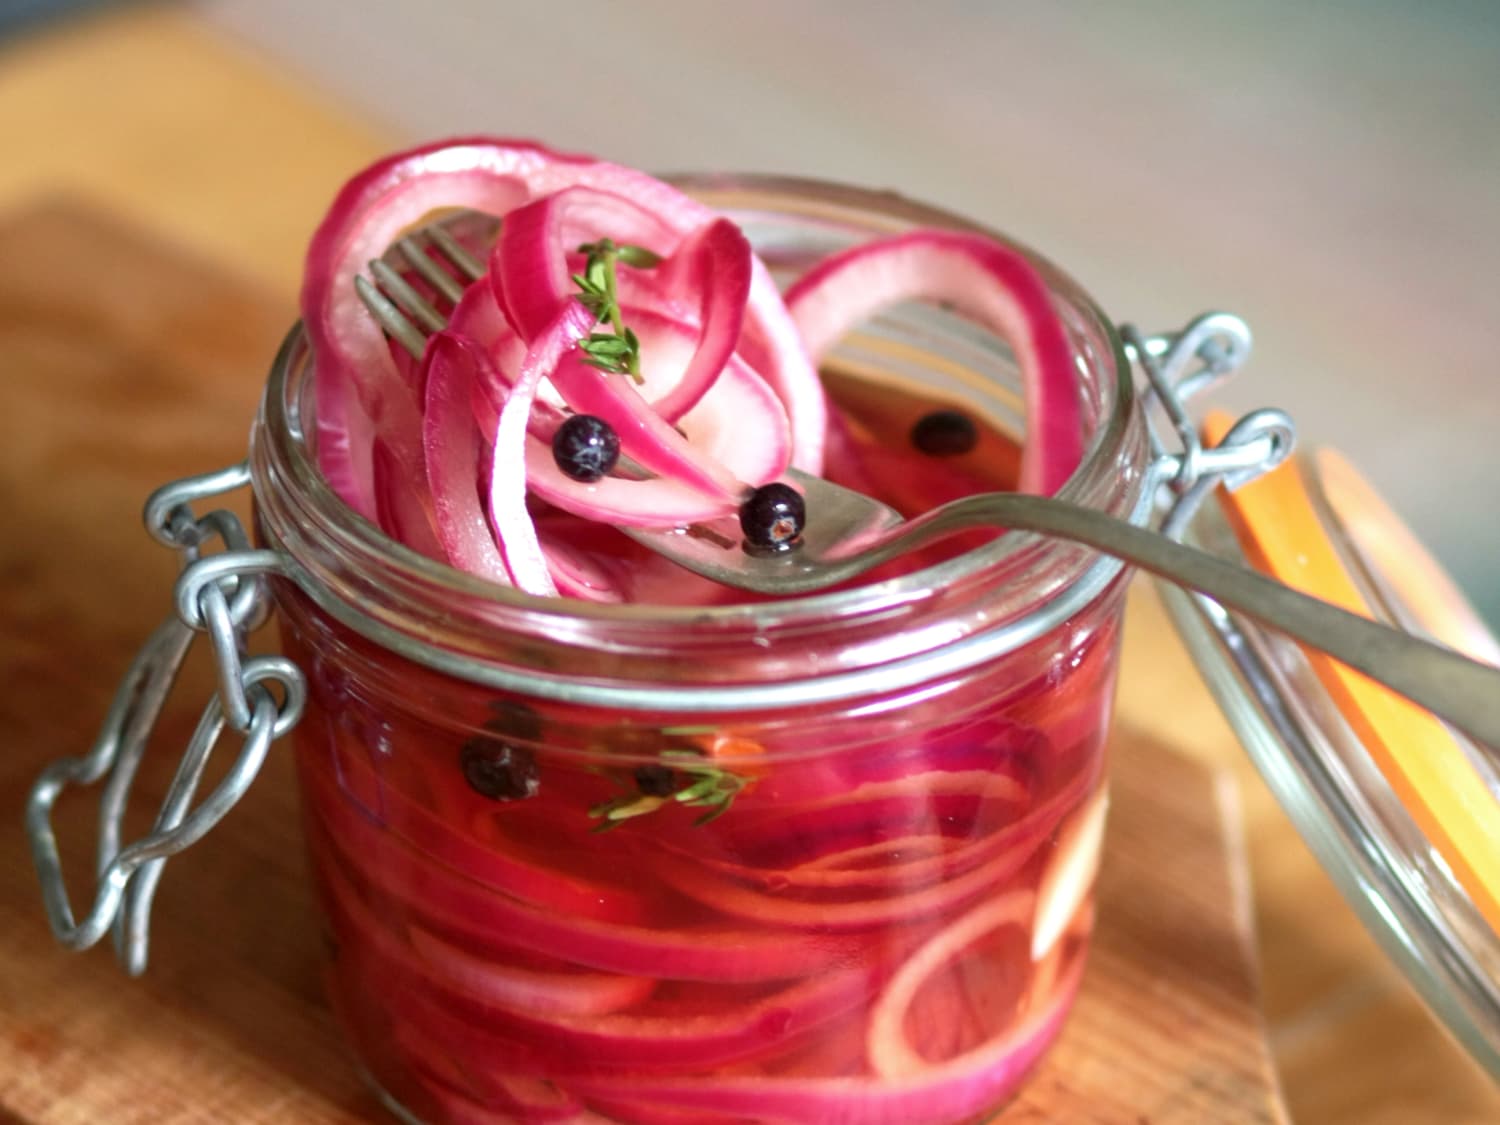 How To Make Quick-Pickled Onions